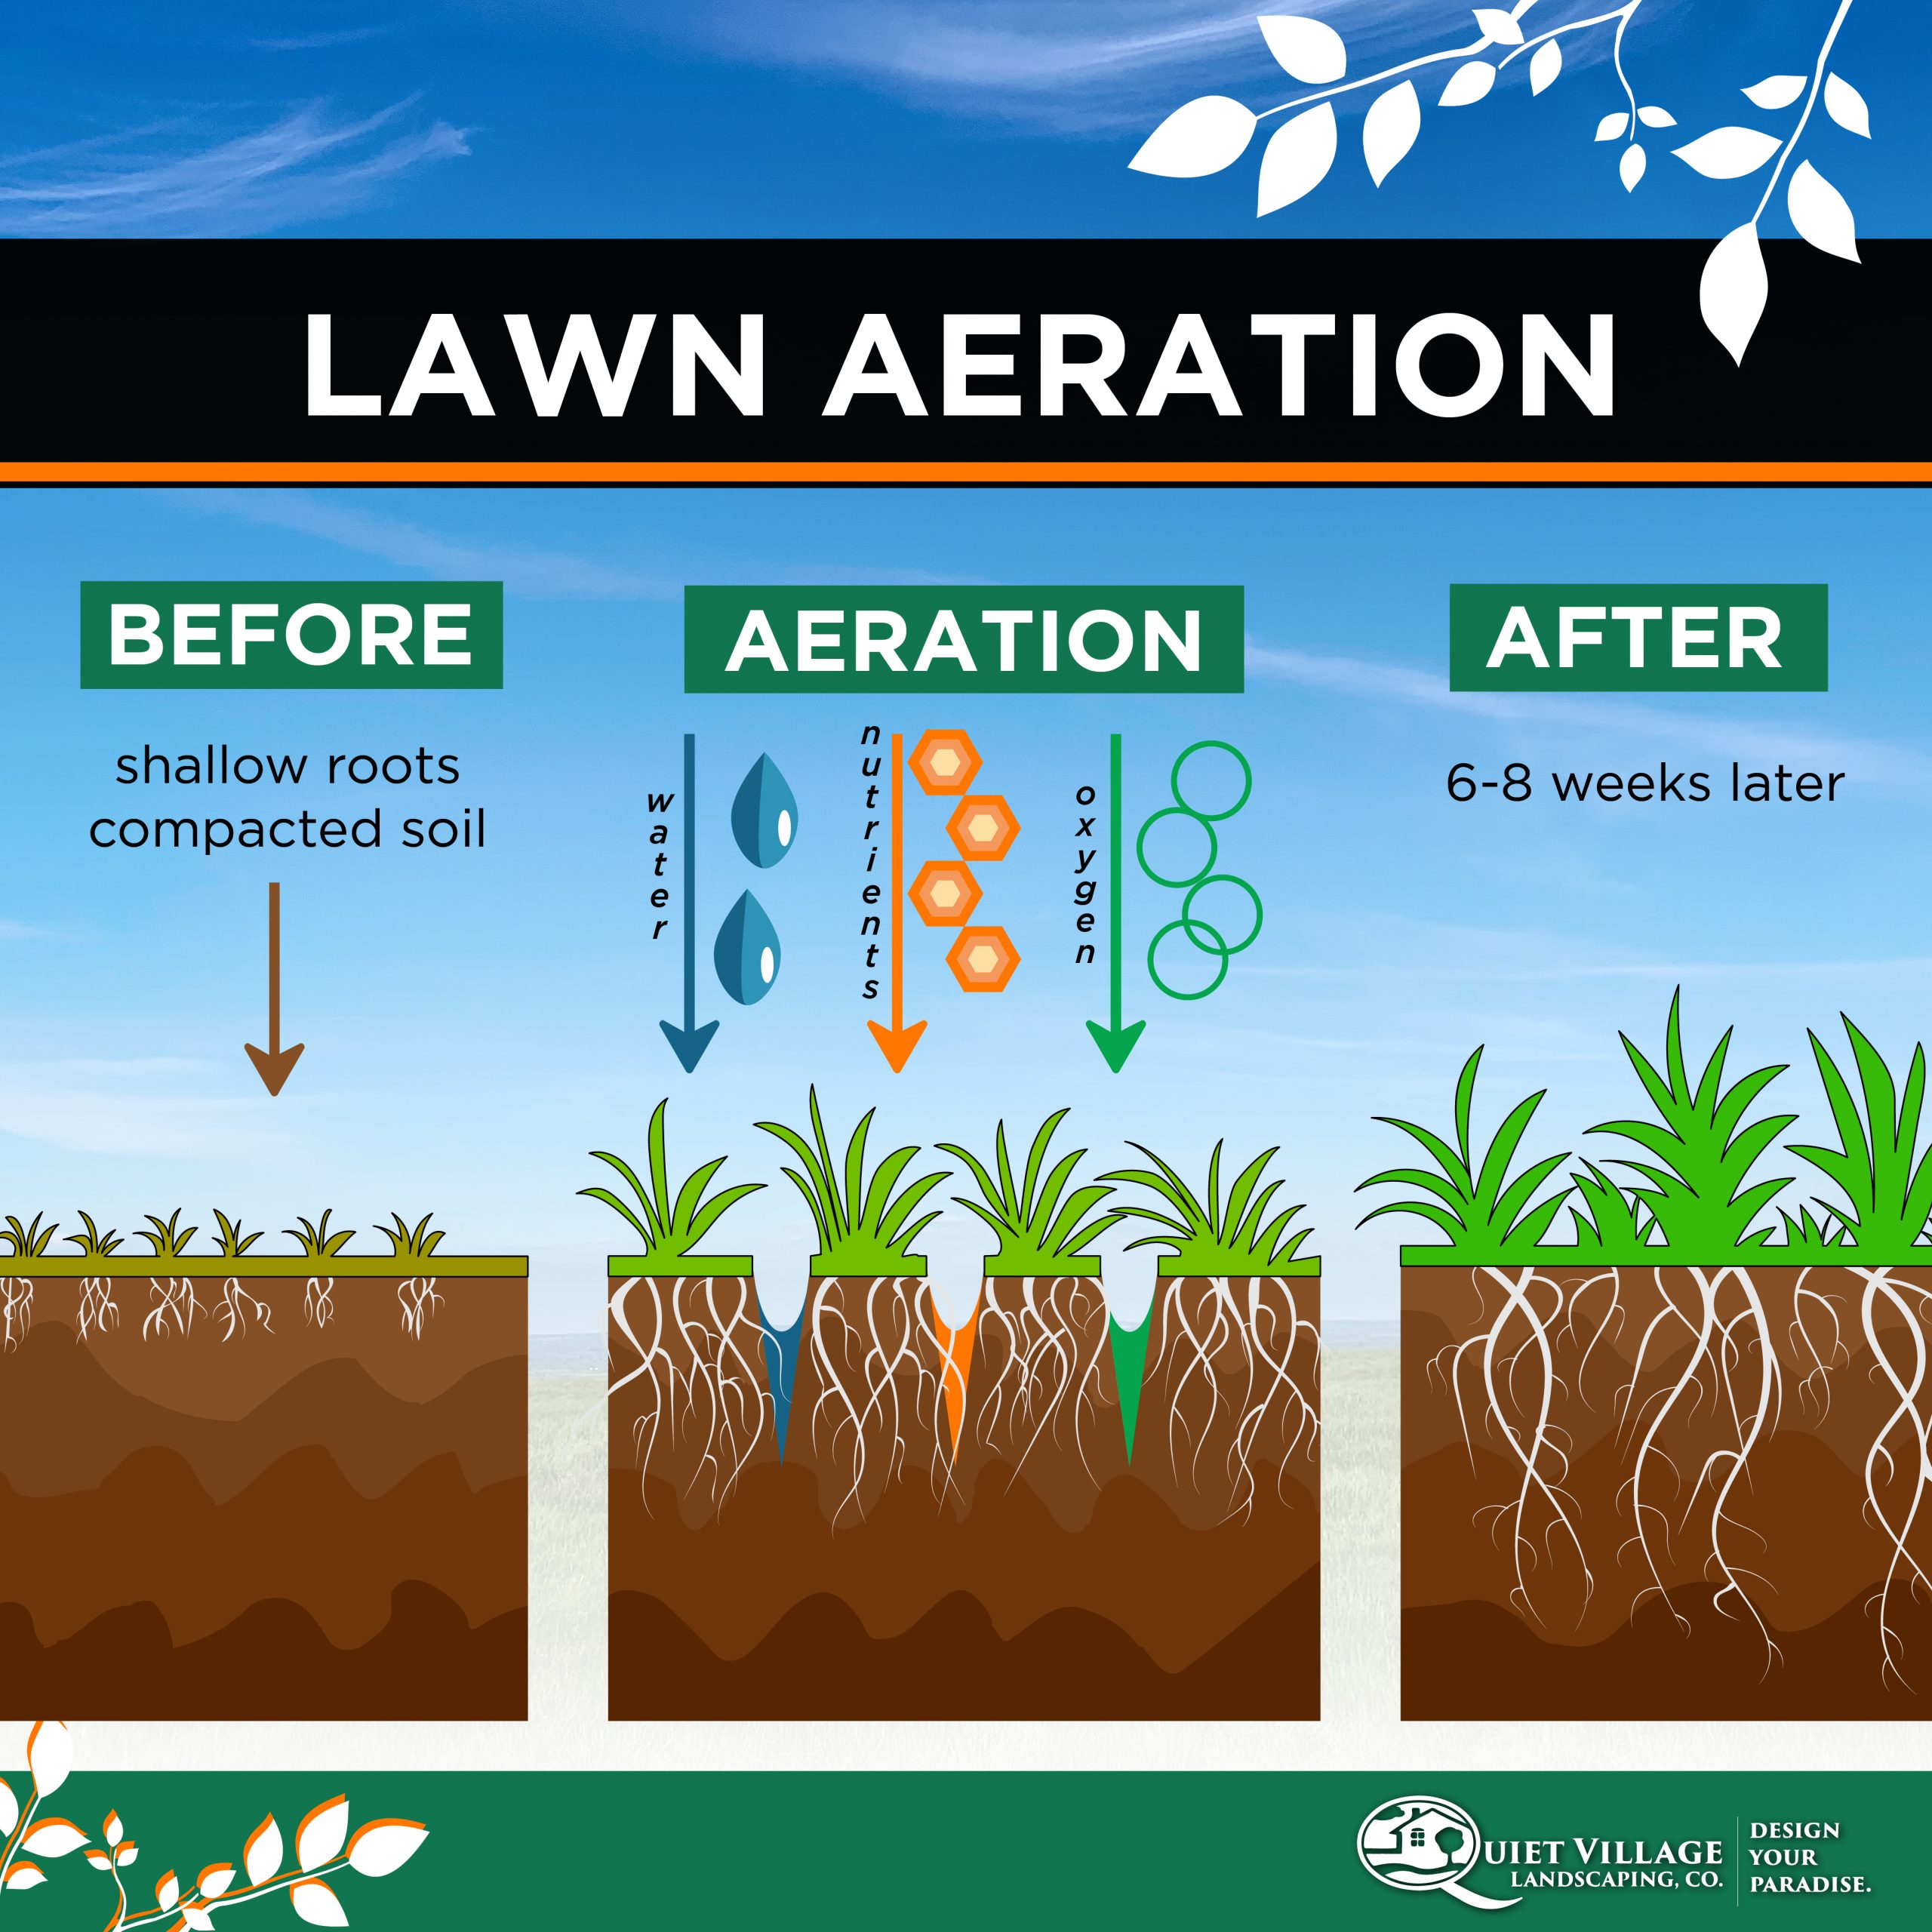 Why Lawn Aeration is Key to a Healthy, Green Lawn